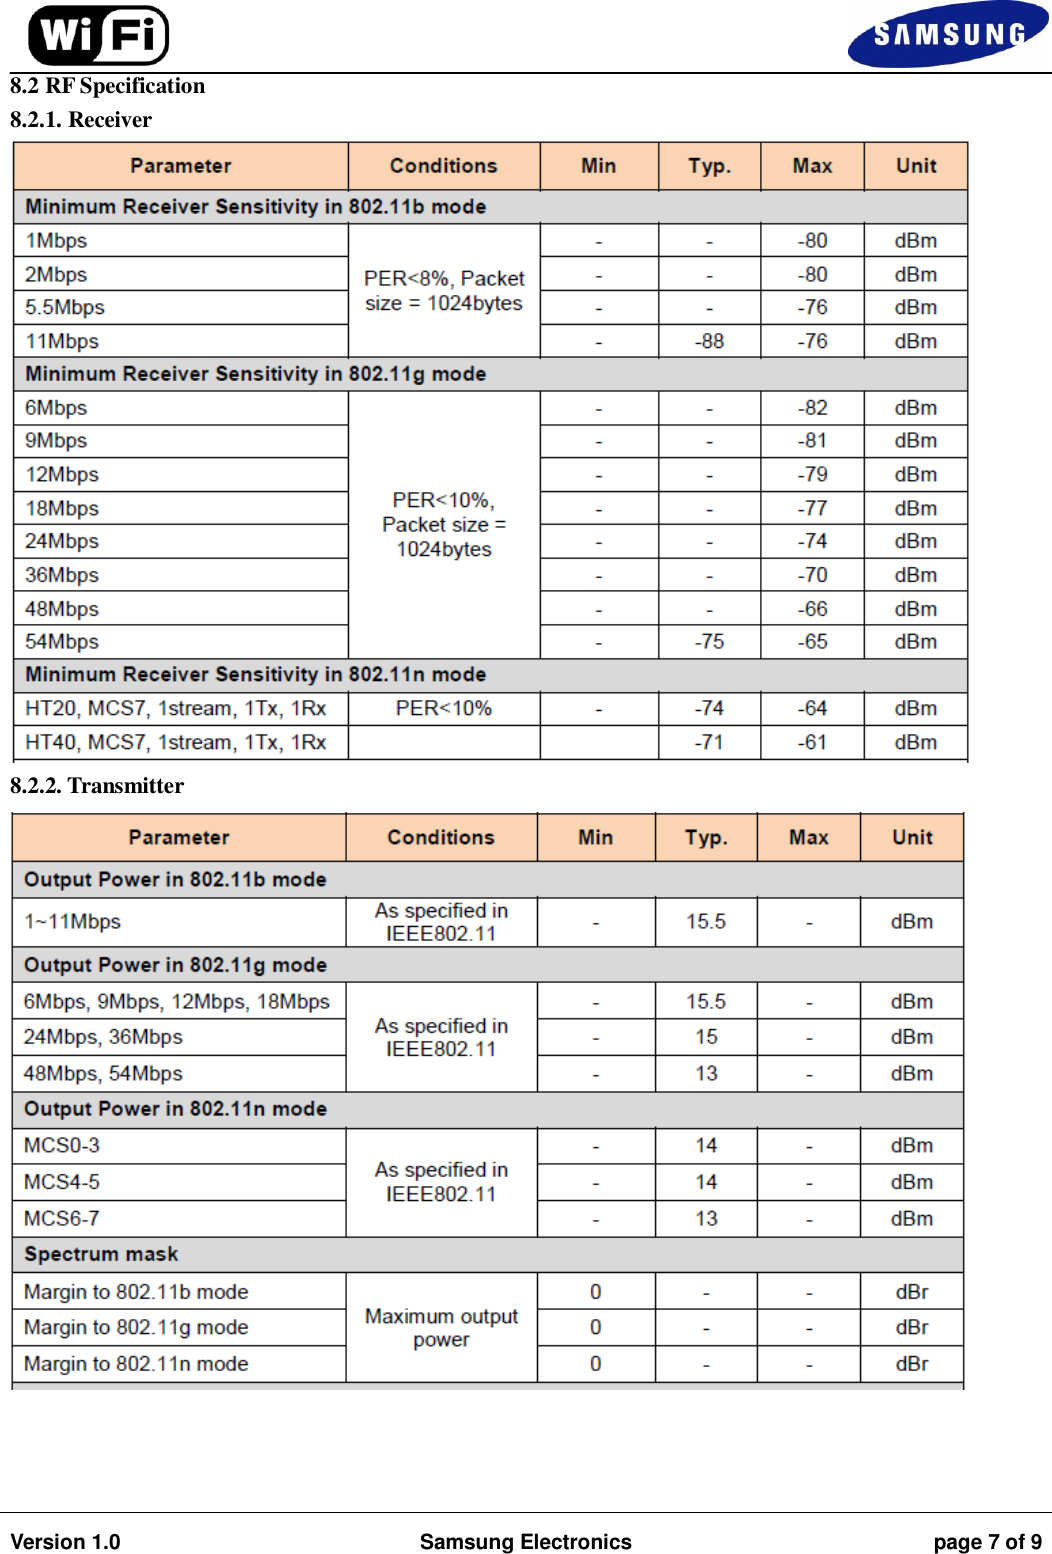                                                                                                                                         Version 1.0 Samsung Electronics page 7 of 9    8.2 RF Specification 8.2.1. Receiver  8.2.2. Transmitter     